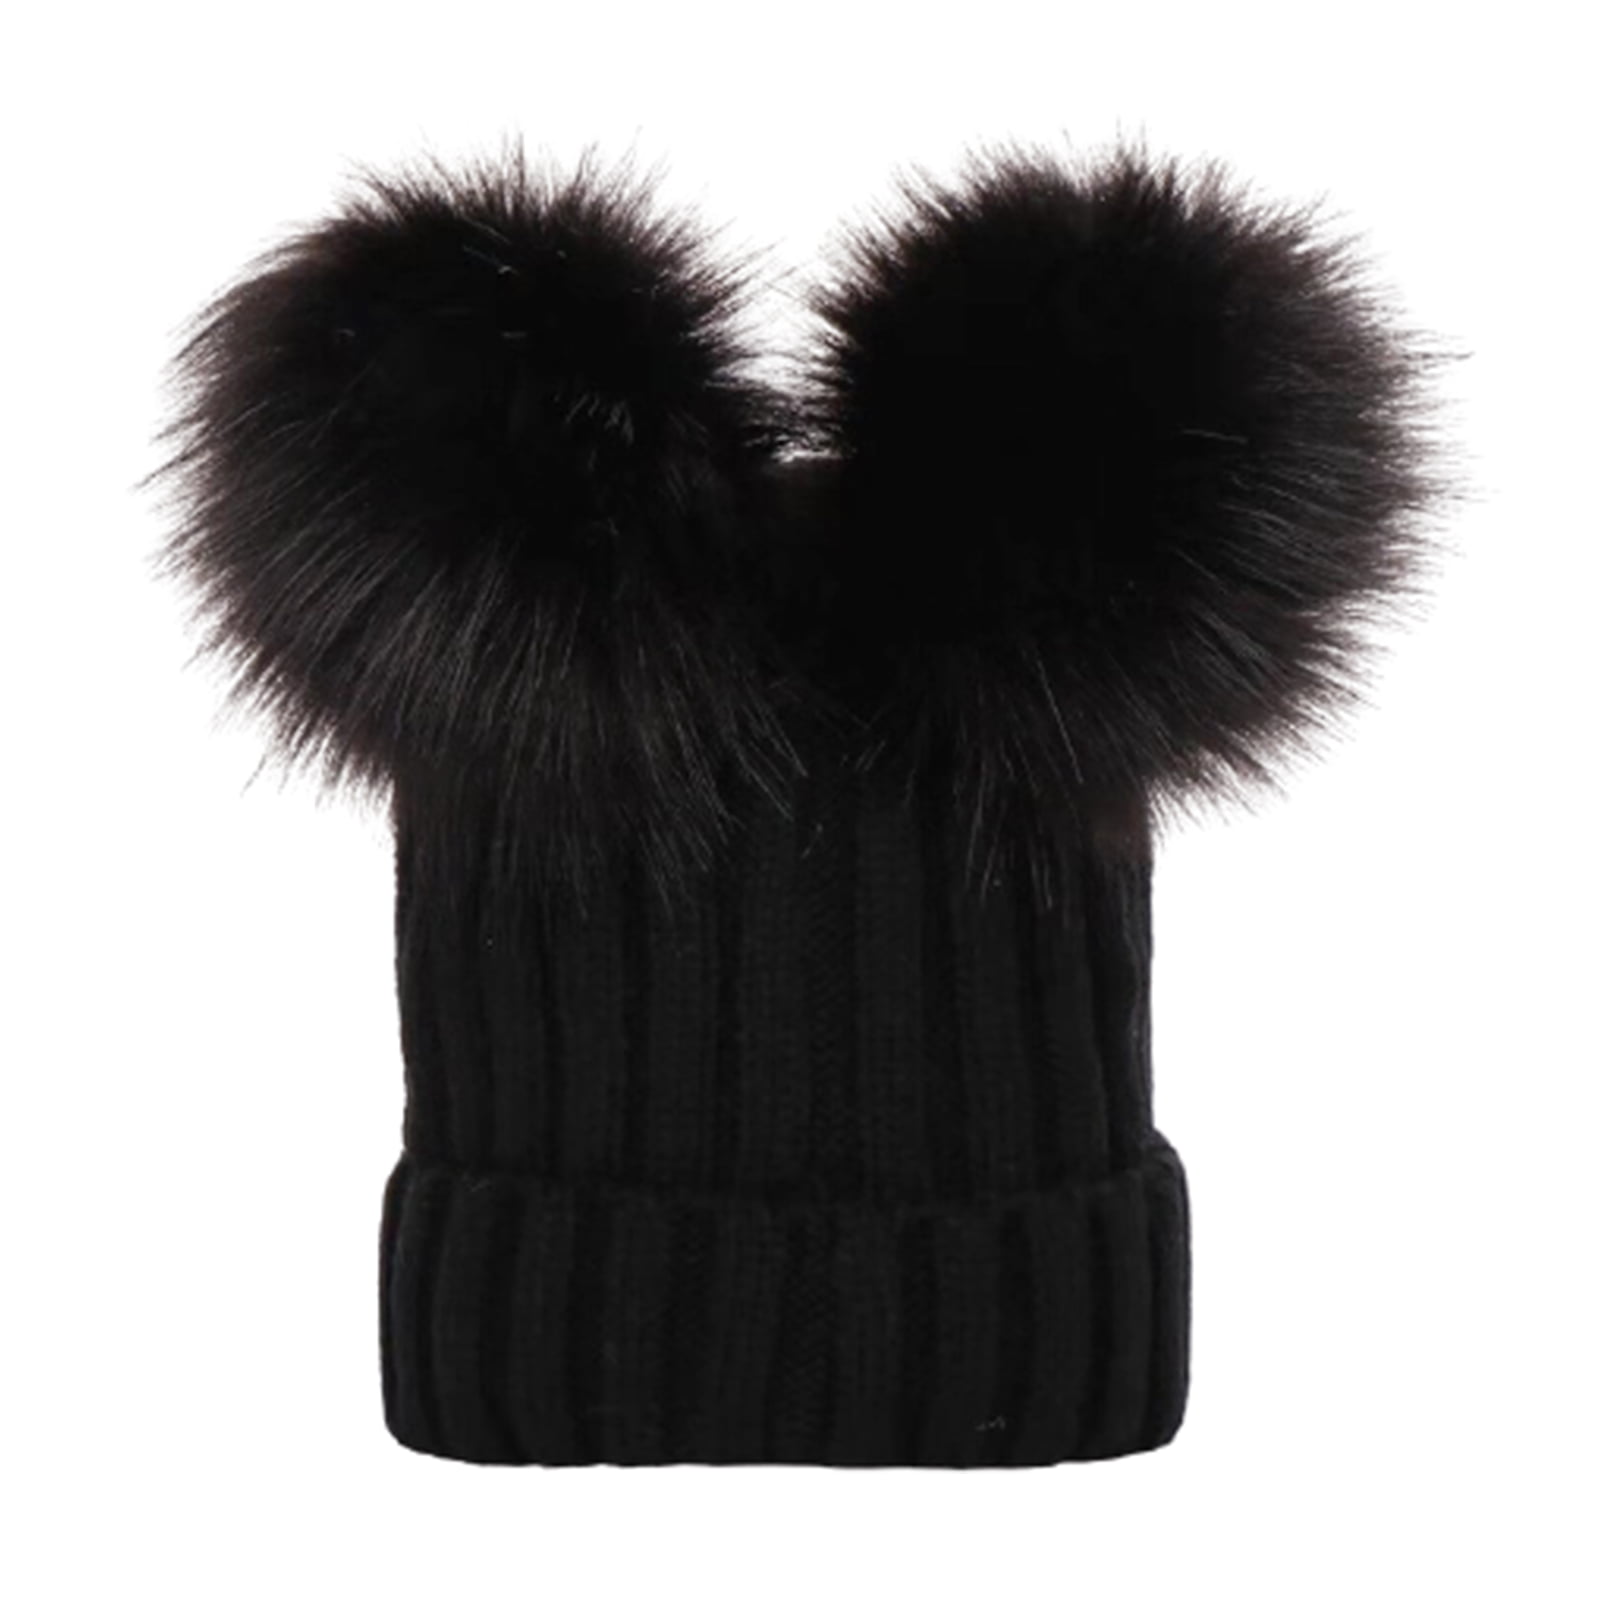 Black and Multi Colored Chicken Beanie Wool Blend Womens Adult Hat Faux Fur Pom Pom Hat 4